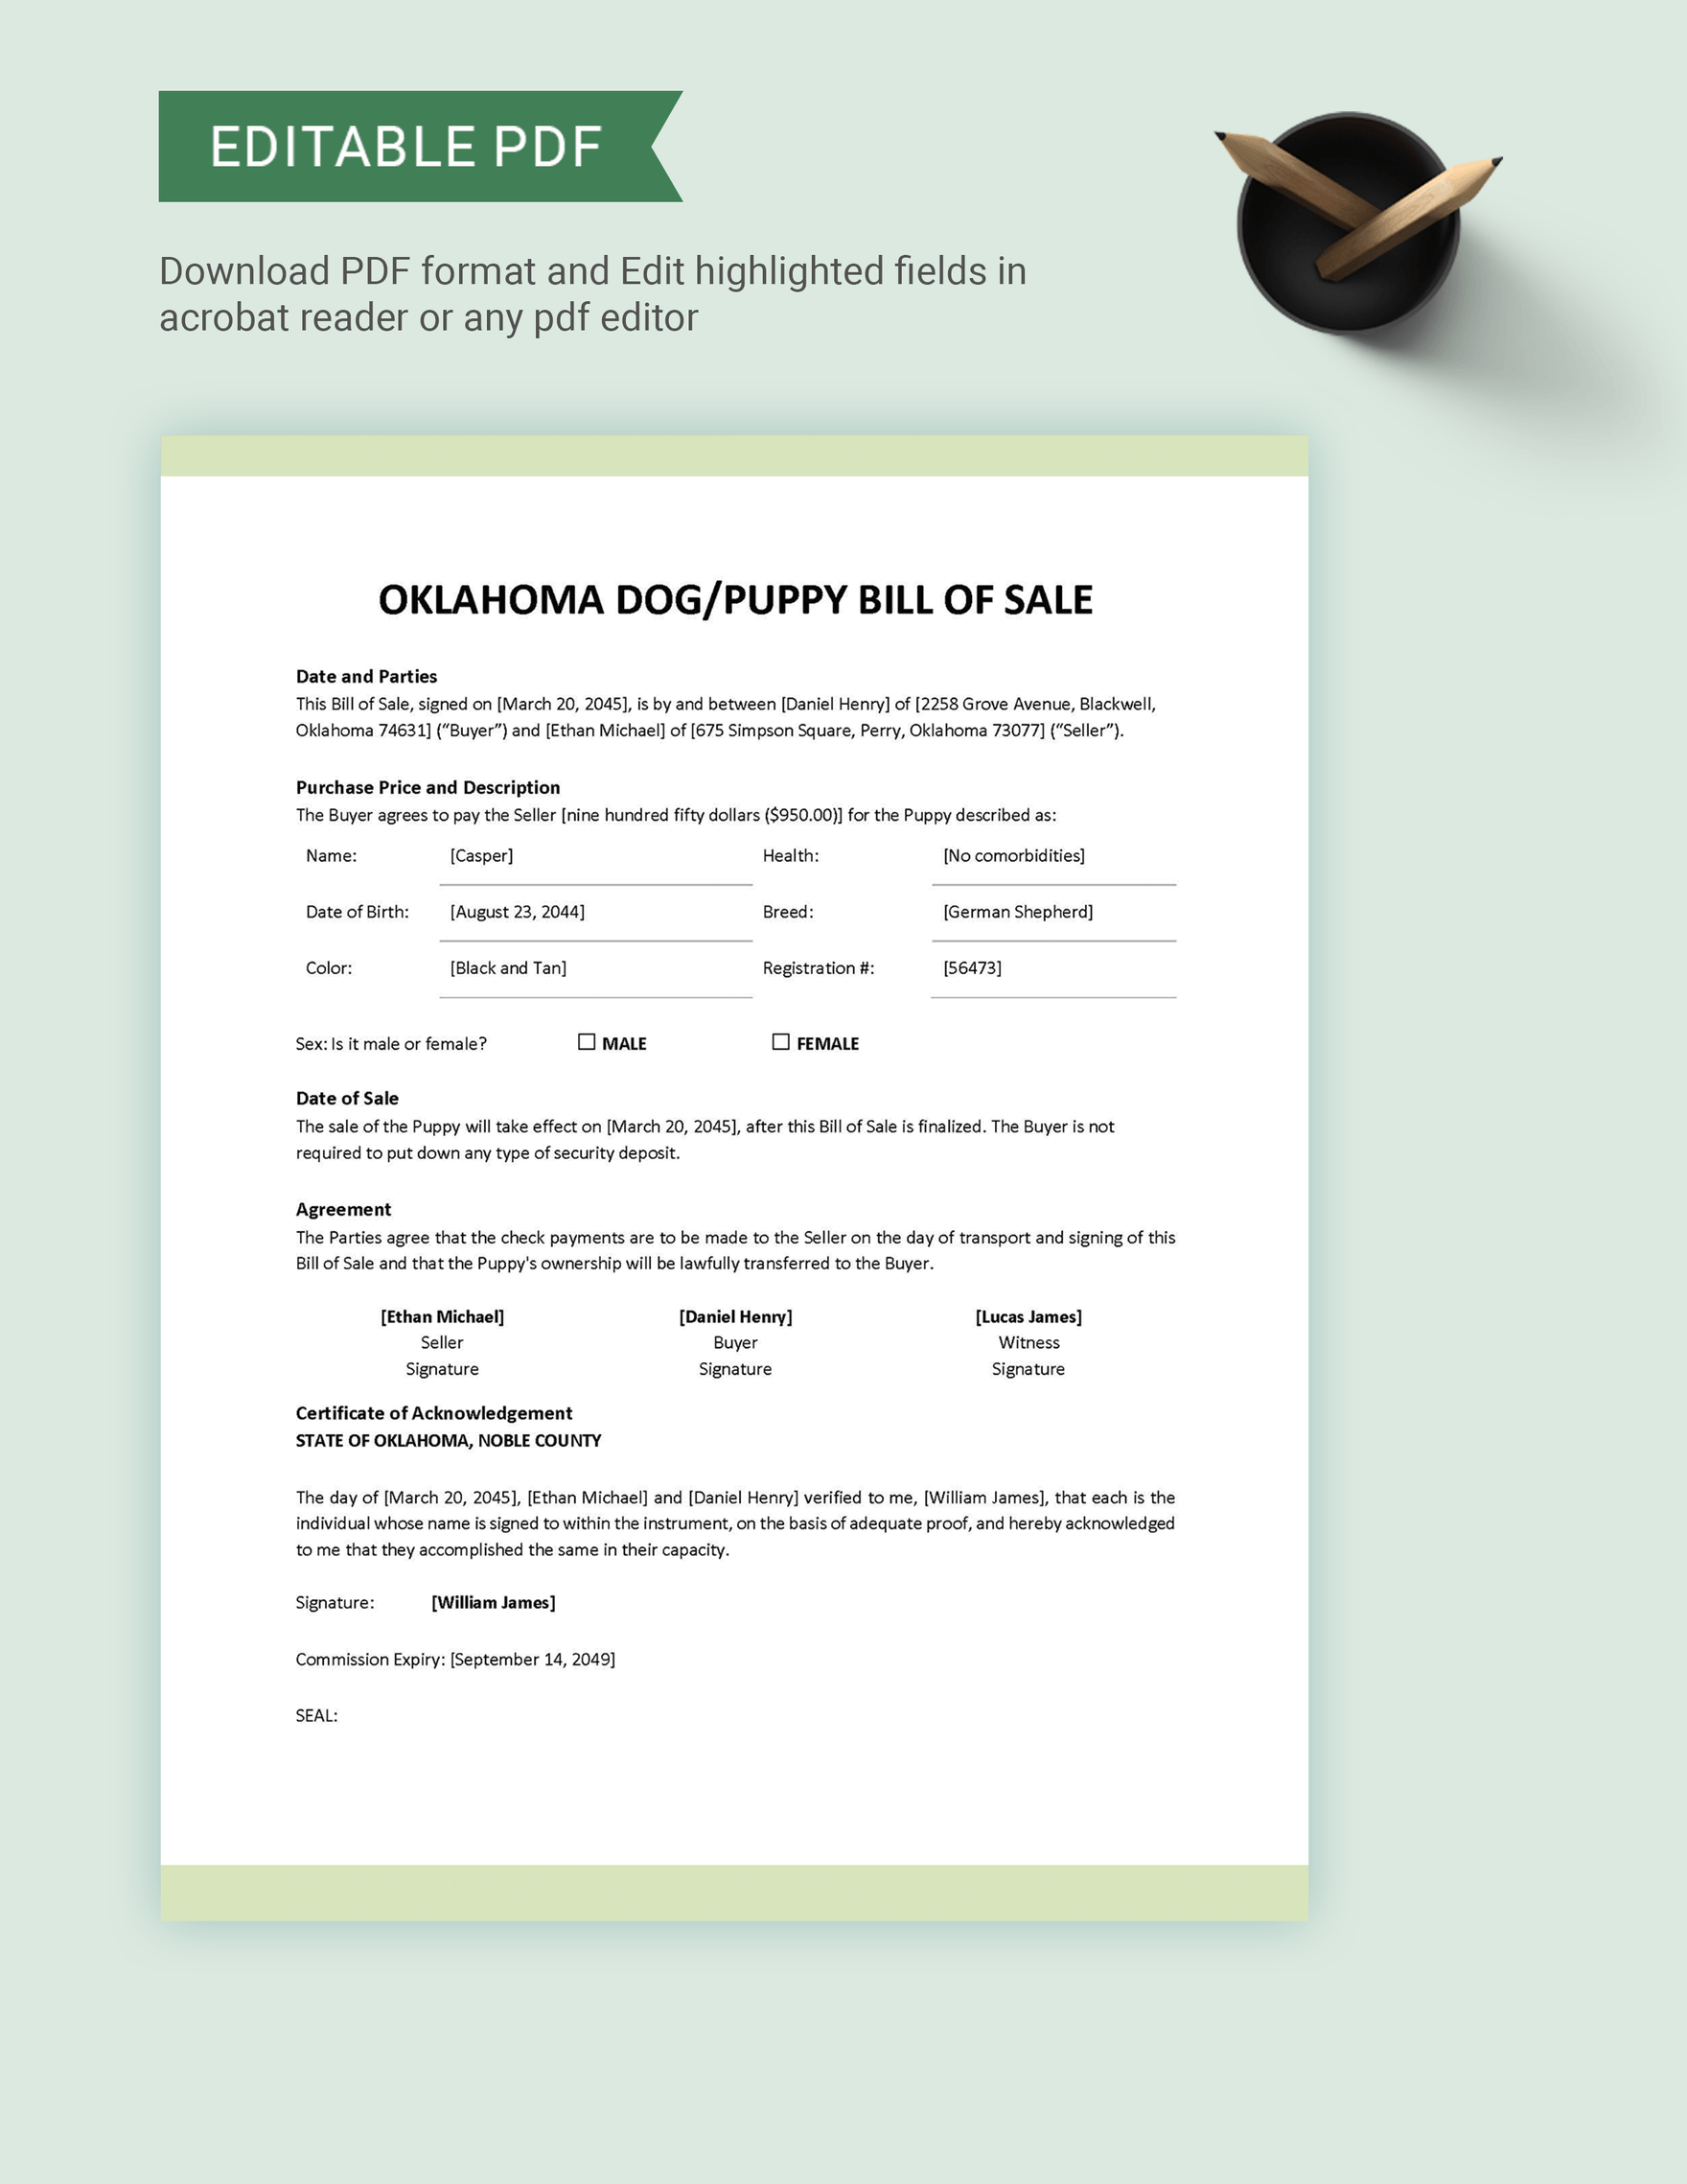 Oklahoma Dog / Puppy Bill of Sale Template